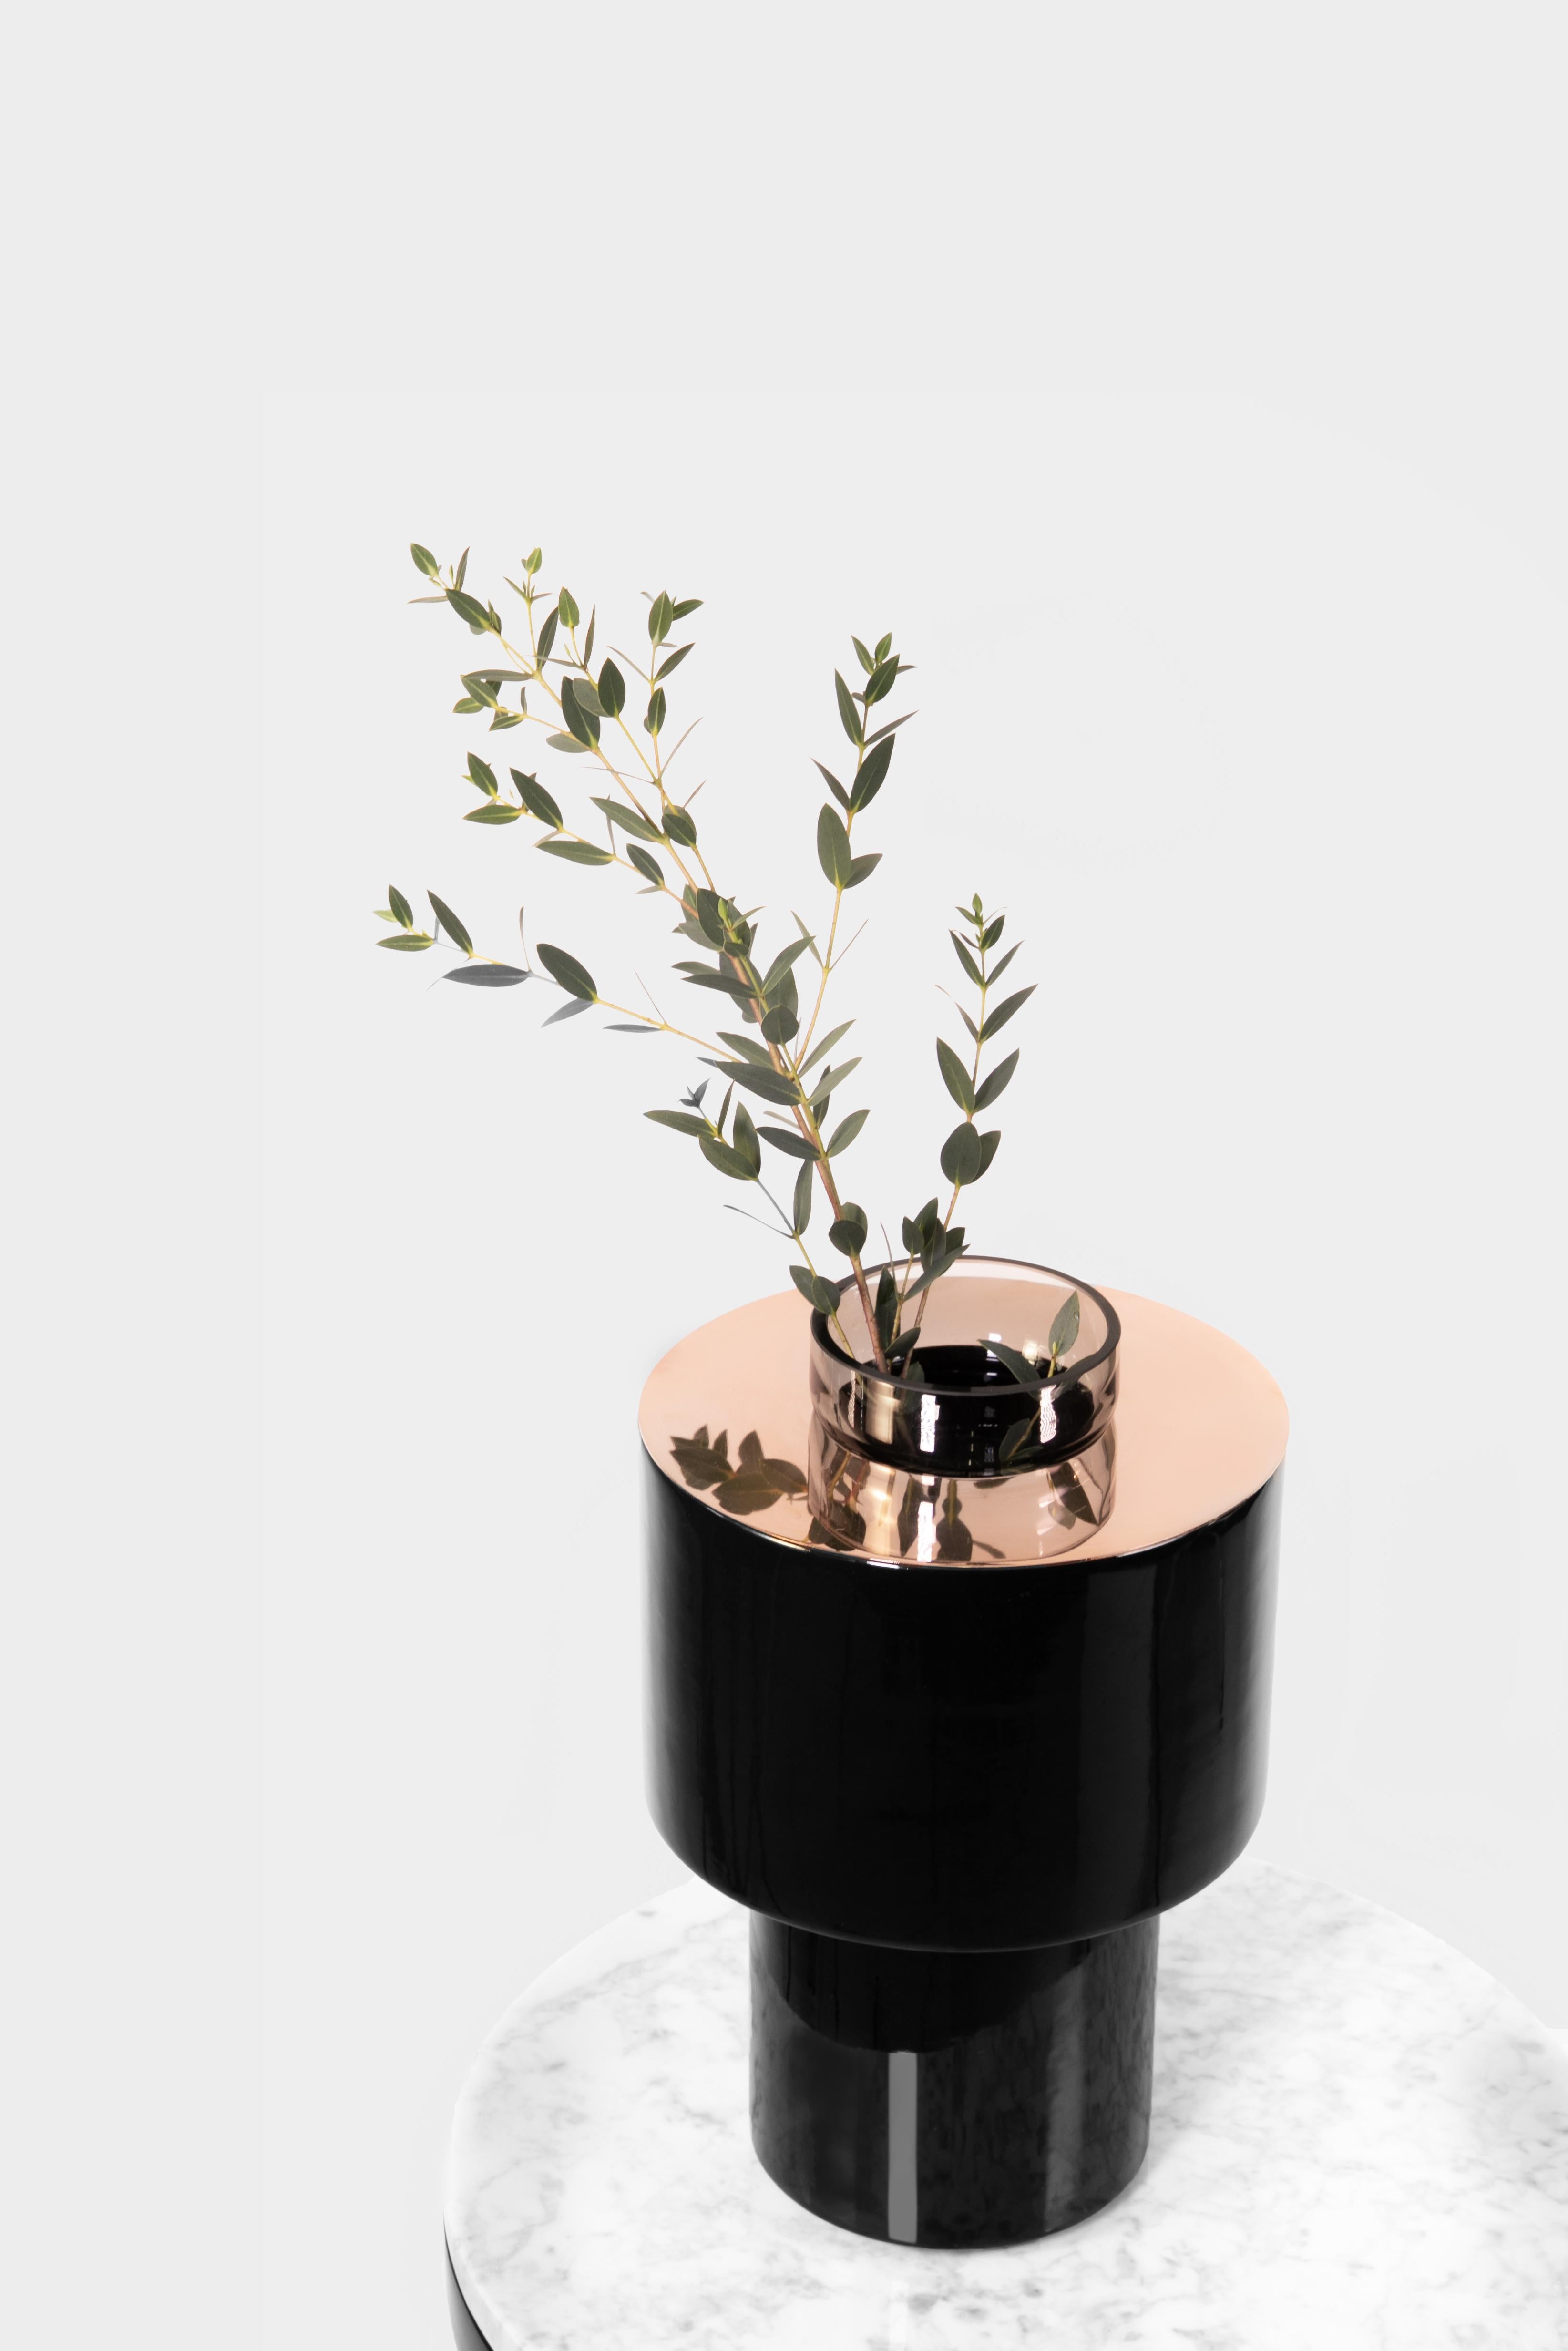 Ceramic and marble vase by Eric Willemart
Materials: Polished copper-plated disc
Black handcrafted ceramic
Dimensions: D 24 x H 28 cm

The container is made of grey blown glass and slides into the ceramic body. You can easily remove it to fill